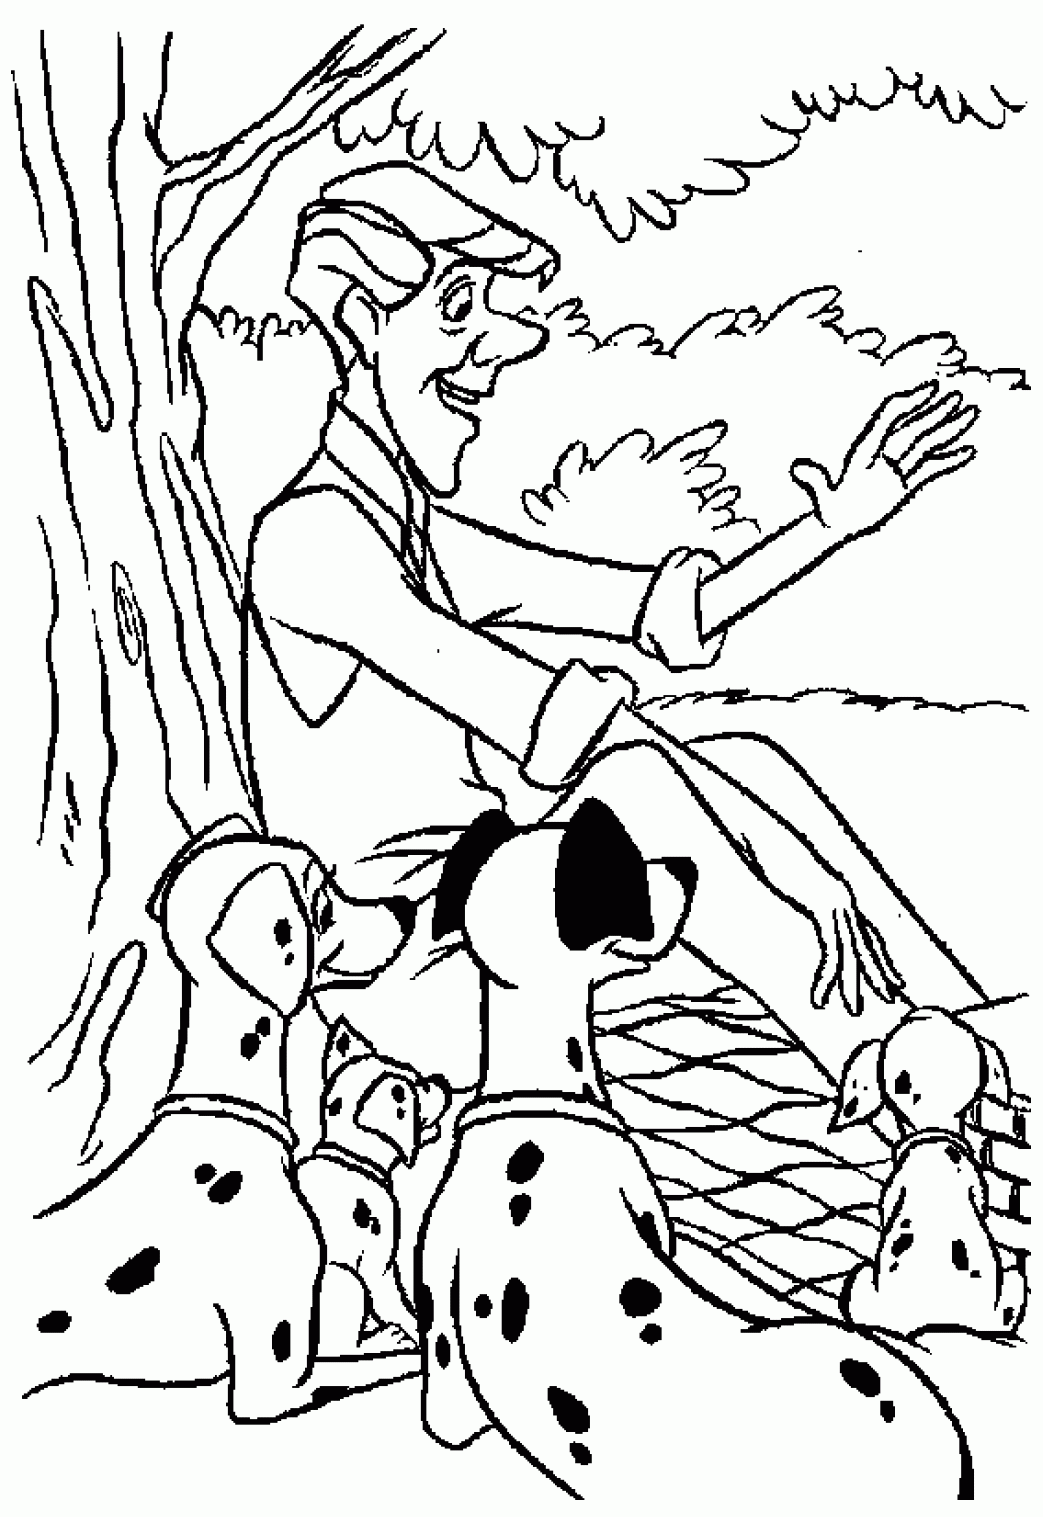 101 dalmatians to download for free - 101 Dalmatians Kids Coloring Pages